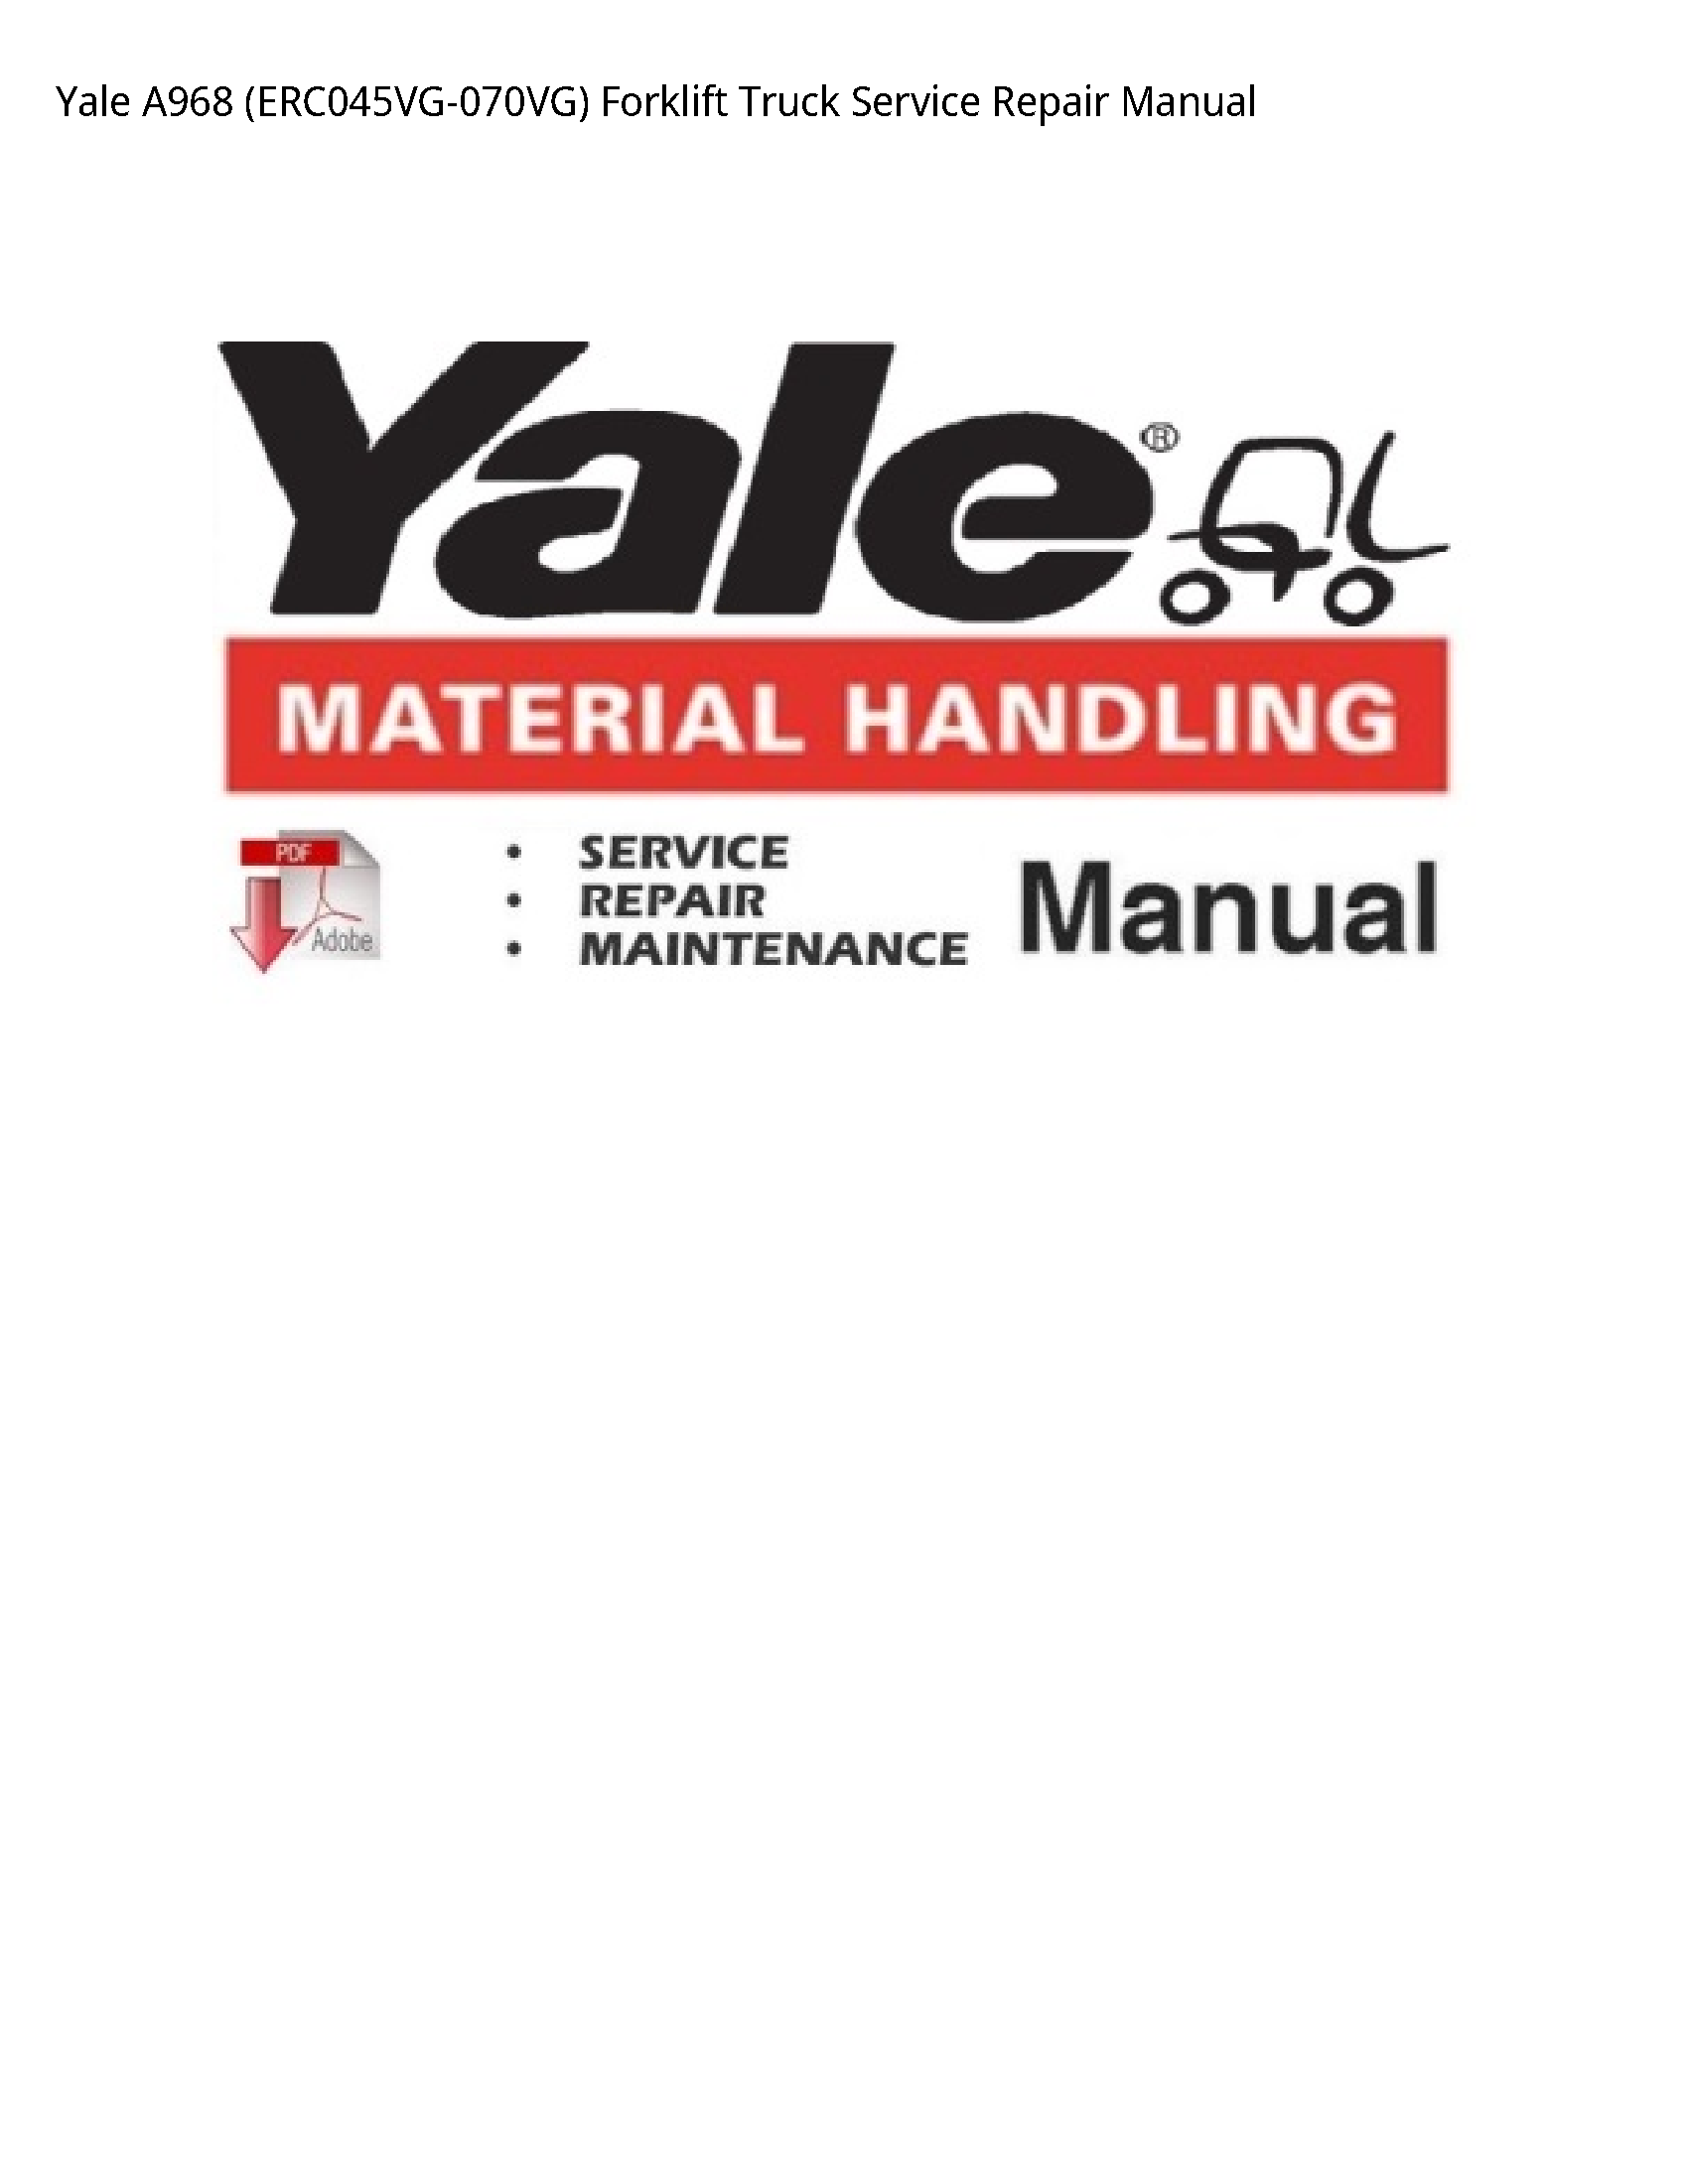 Yale A968 Forklift Truck manual